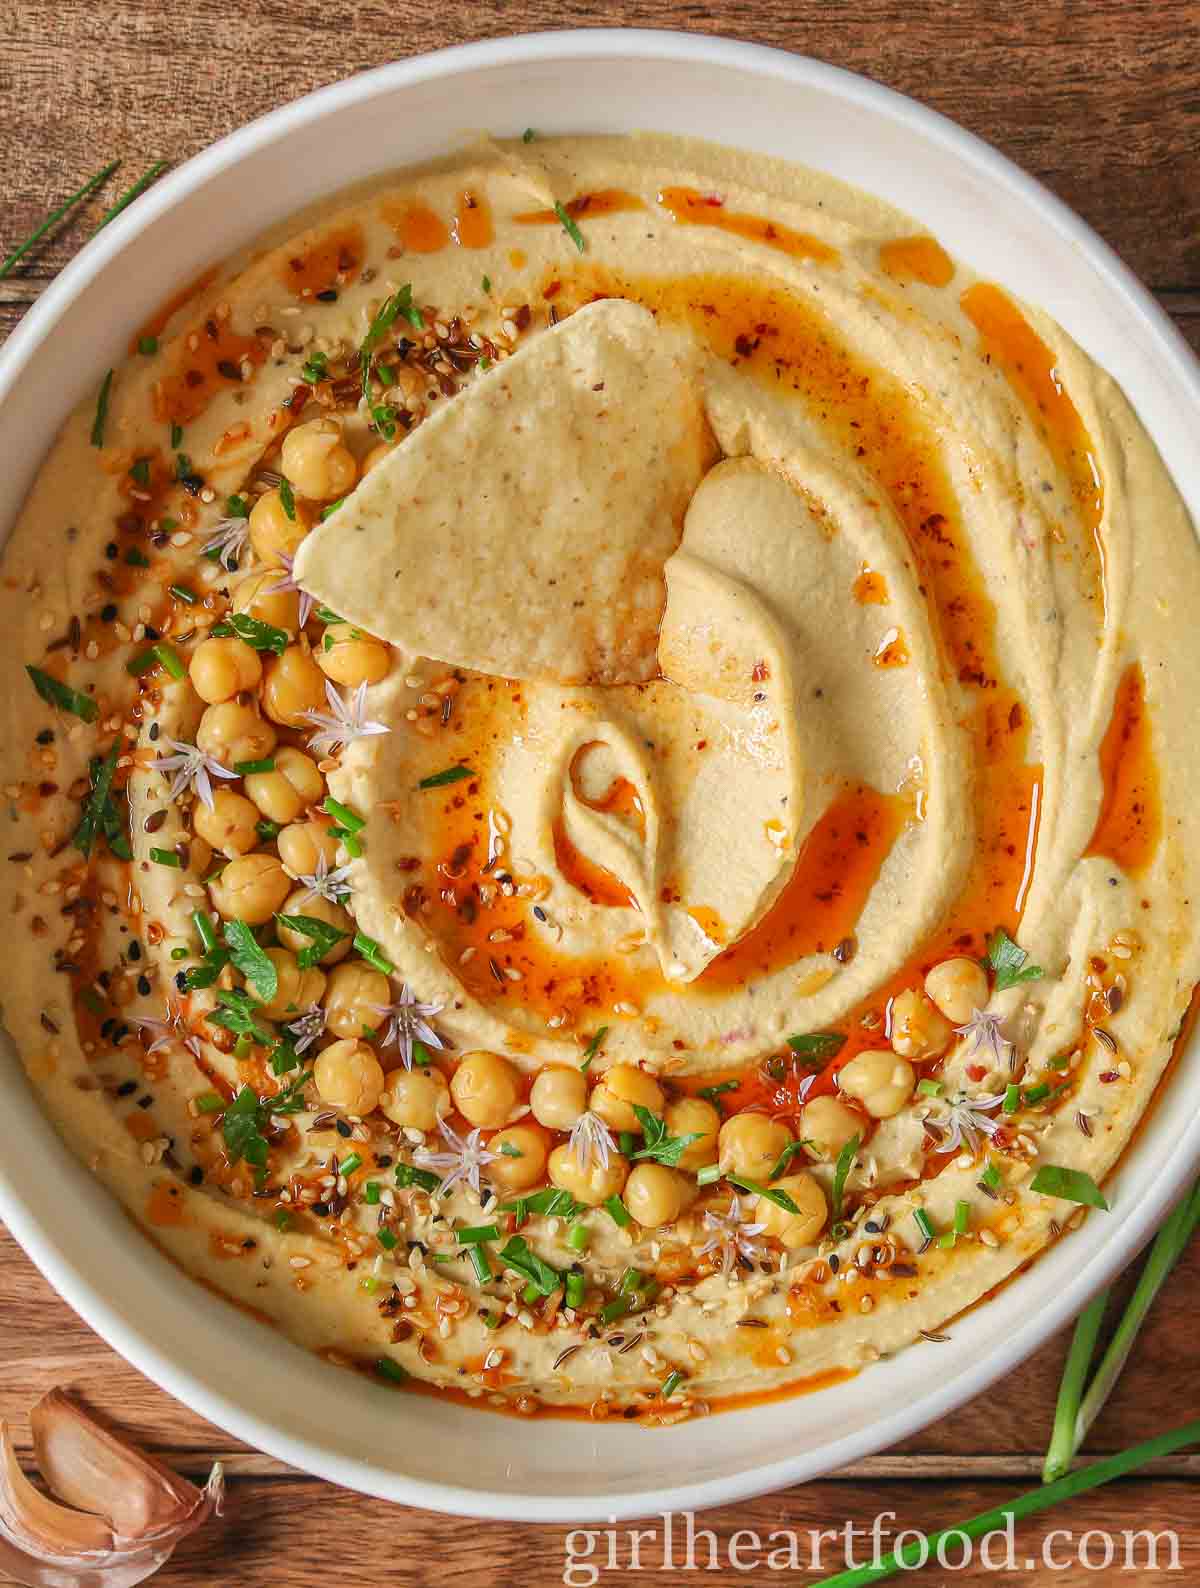 Bowl of creamy hummus with a tortilla chip dunked into it.